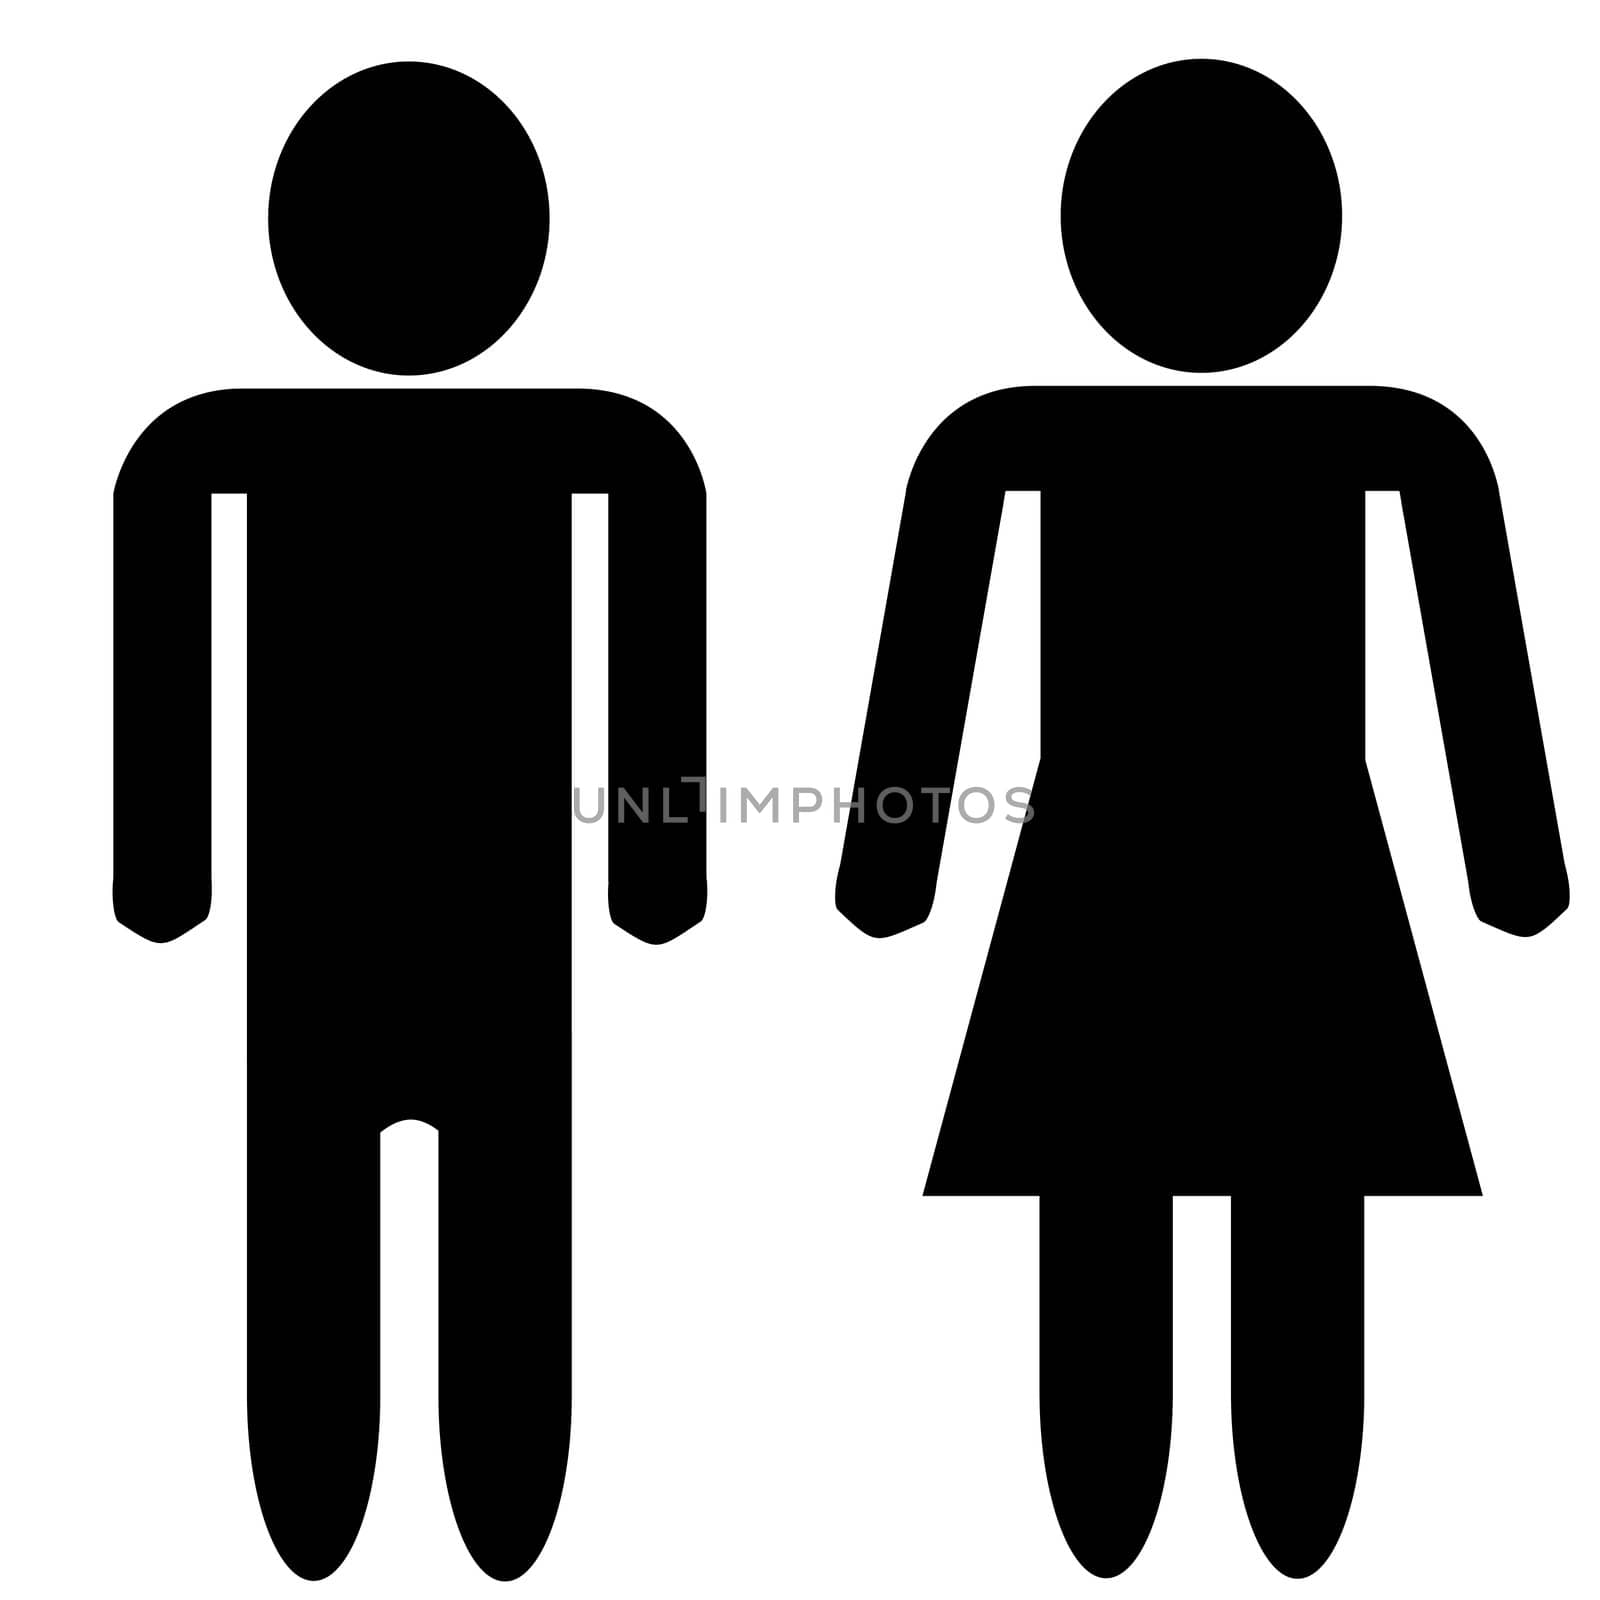 A illustration of a man and woman silhouette, both with blank faces